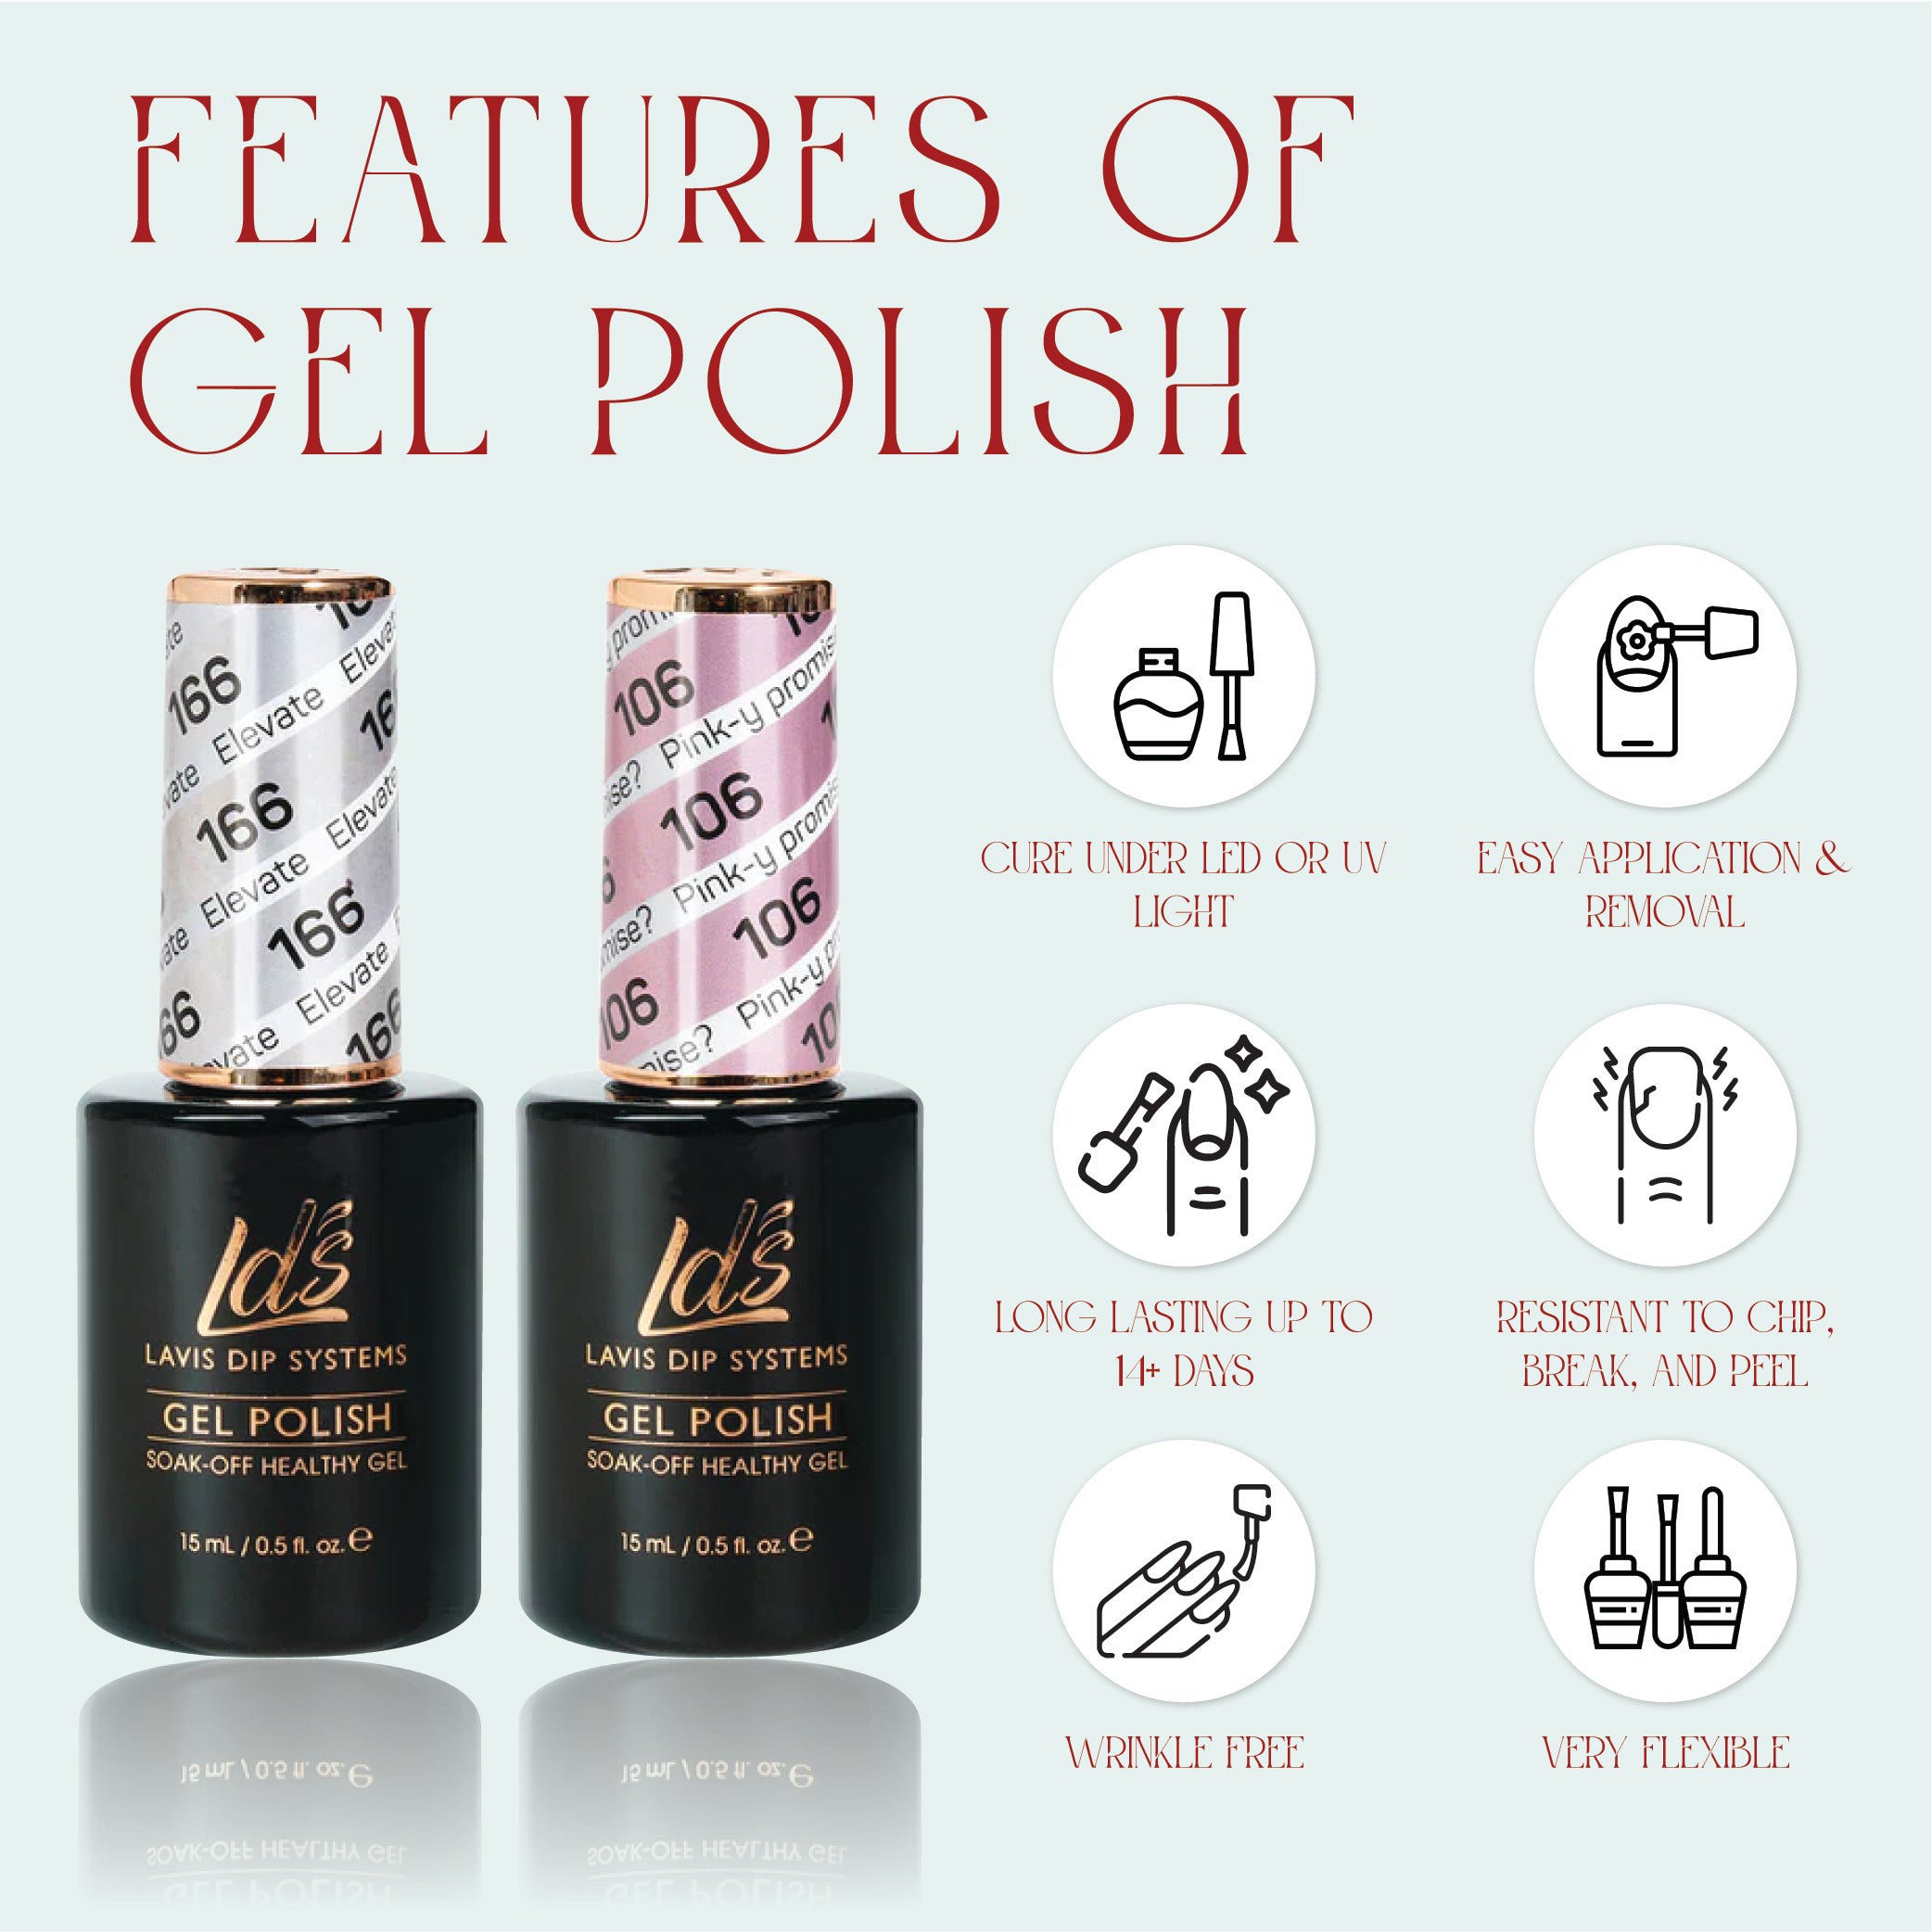 LDS Gel Nail Polish Duo - 127 Purple Colors - Dare To Wear